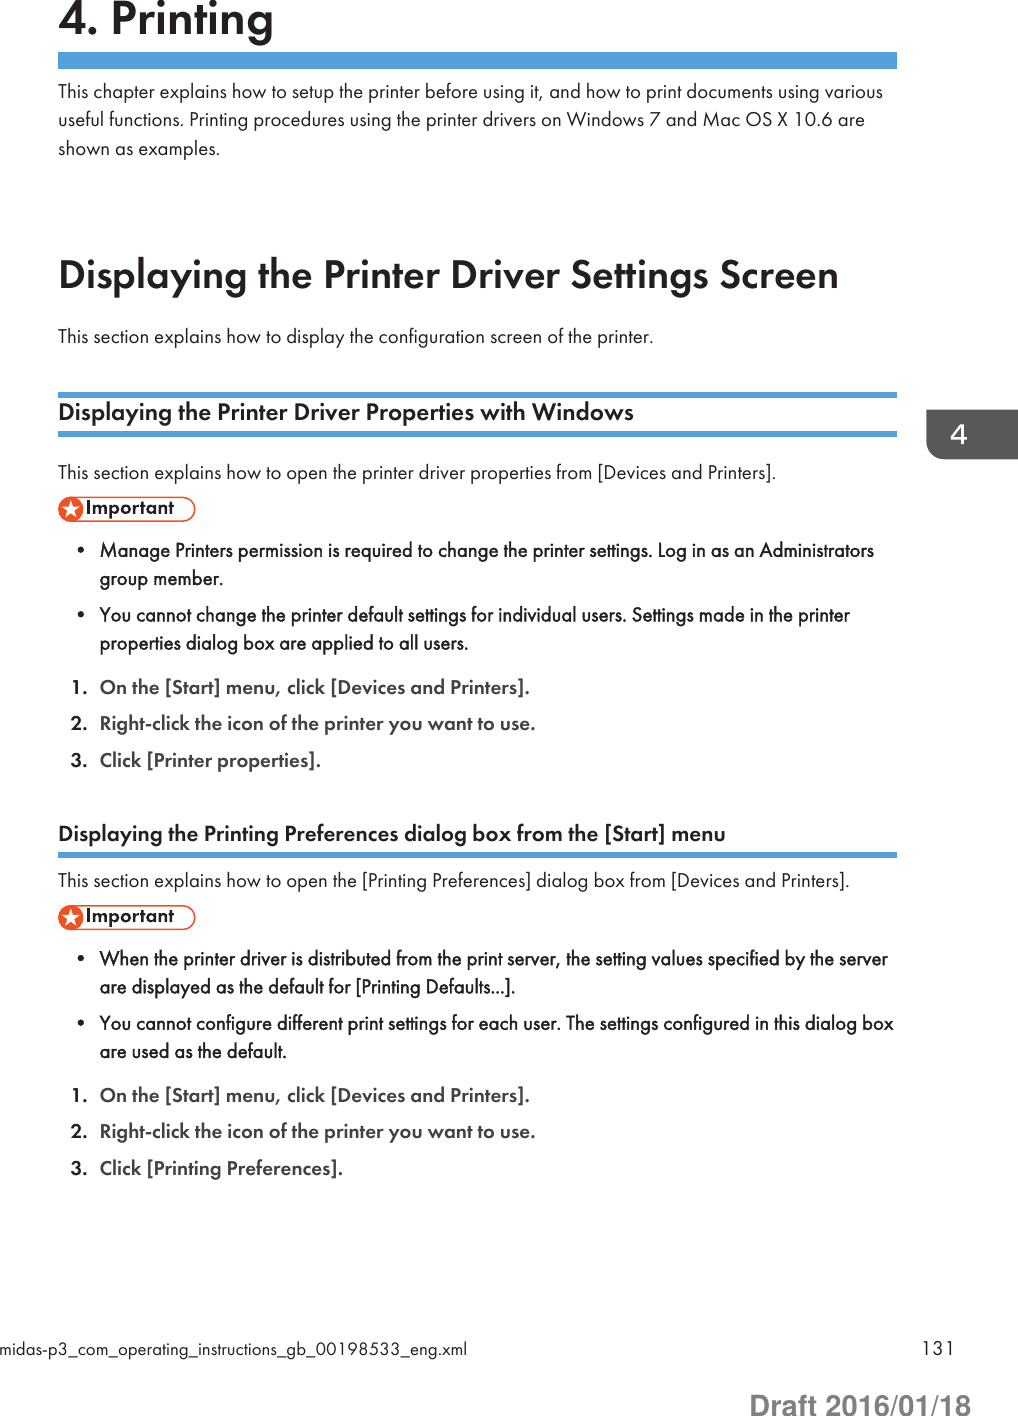 4. PrintingThis chapter explains how to setup the printer before using it, and how to print documents using varioususeful functions. Printing procedures using the printer drivers on Windows 7 and Mac OS X 10.6 areshown as examples.Displaying the Printer Driver Settings ScreenThis section explains how to display the configuration screen of the printer.Displaying the Printer Driver Properties with WindowsThis section explains how to open the printer driver properties from [Devices and Printers].• Manage Printers permission is required to change the printer settings. Log in as an Administratorsgroup member.• You cannot change the printer default settings for individual users. Settings made in the printerproperties dialog box are applied to all users.1. On the [Start] menu, click [Devices and Printers].2. Right-click the icon of the printer you want to use.3. Click [Printer properties].Displaying the Printing Preferences dialog box from the [Start] menuThis section explains how to open the [Printing Preferences] dialog box from [Devices and Printers].• When the printer driver is distributed from the print server, the setting values specified by the serverare displayed as the default for [Printing Defaults...].• You cannot configure different print settings for each user. The settings configured in this dialog boxare used as the default.1. On the [Start] menu, click [Devices and Printers].2. Right-click the icon of the printer you want to use.3. Click [Printing Preferences].midas-p3_com_operating_instructions_gb_00198533_eng.xml 131Draft 2016/01/18